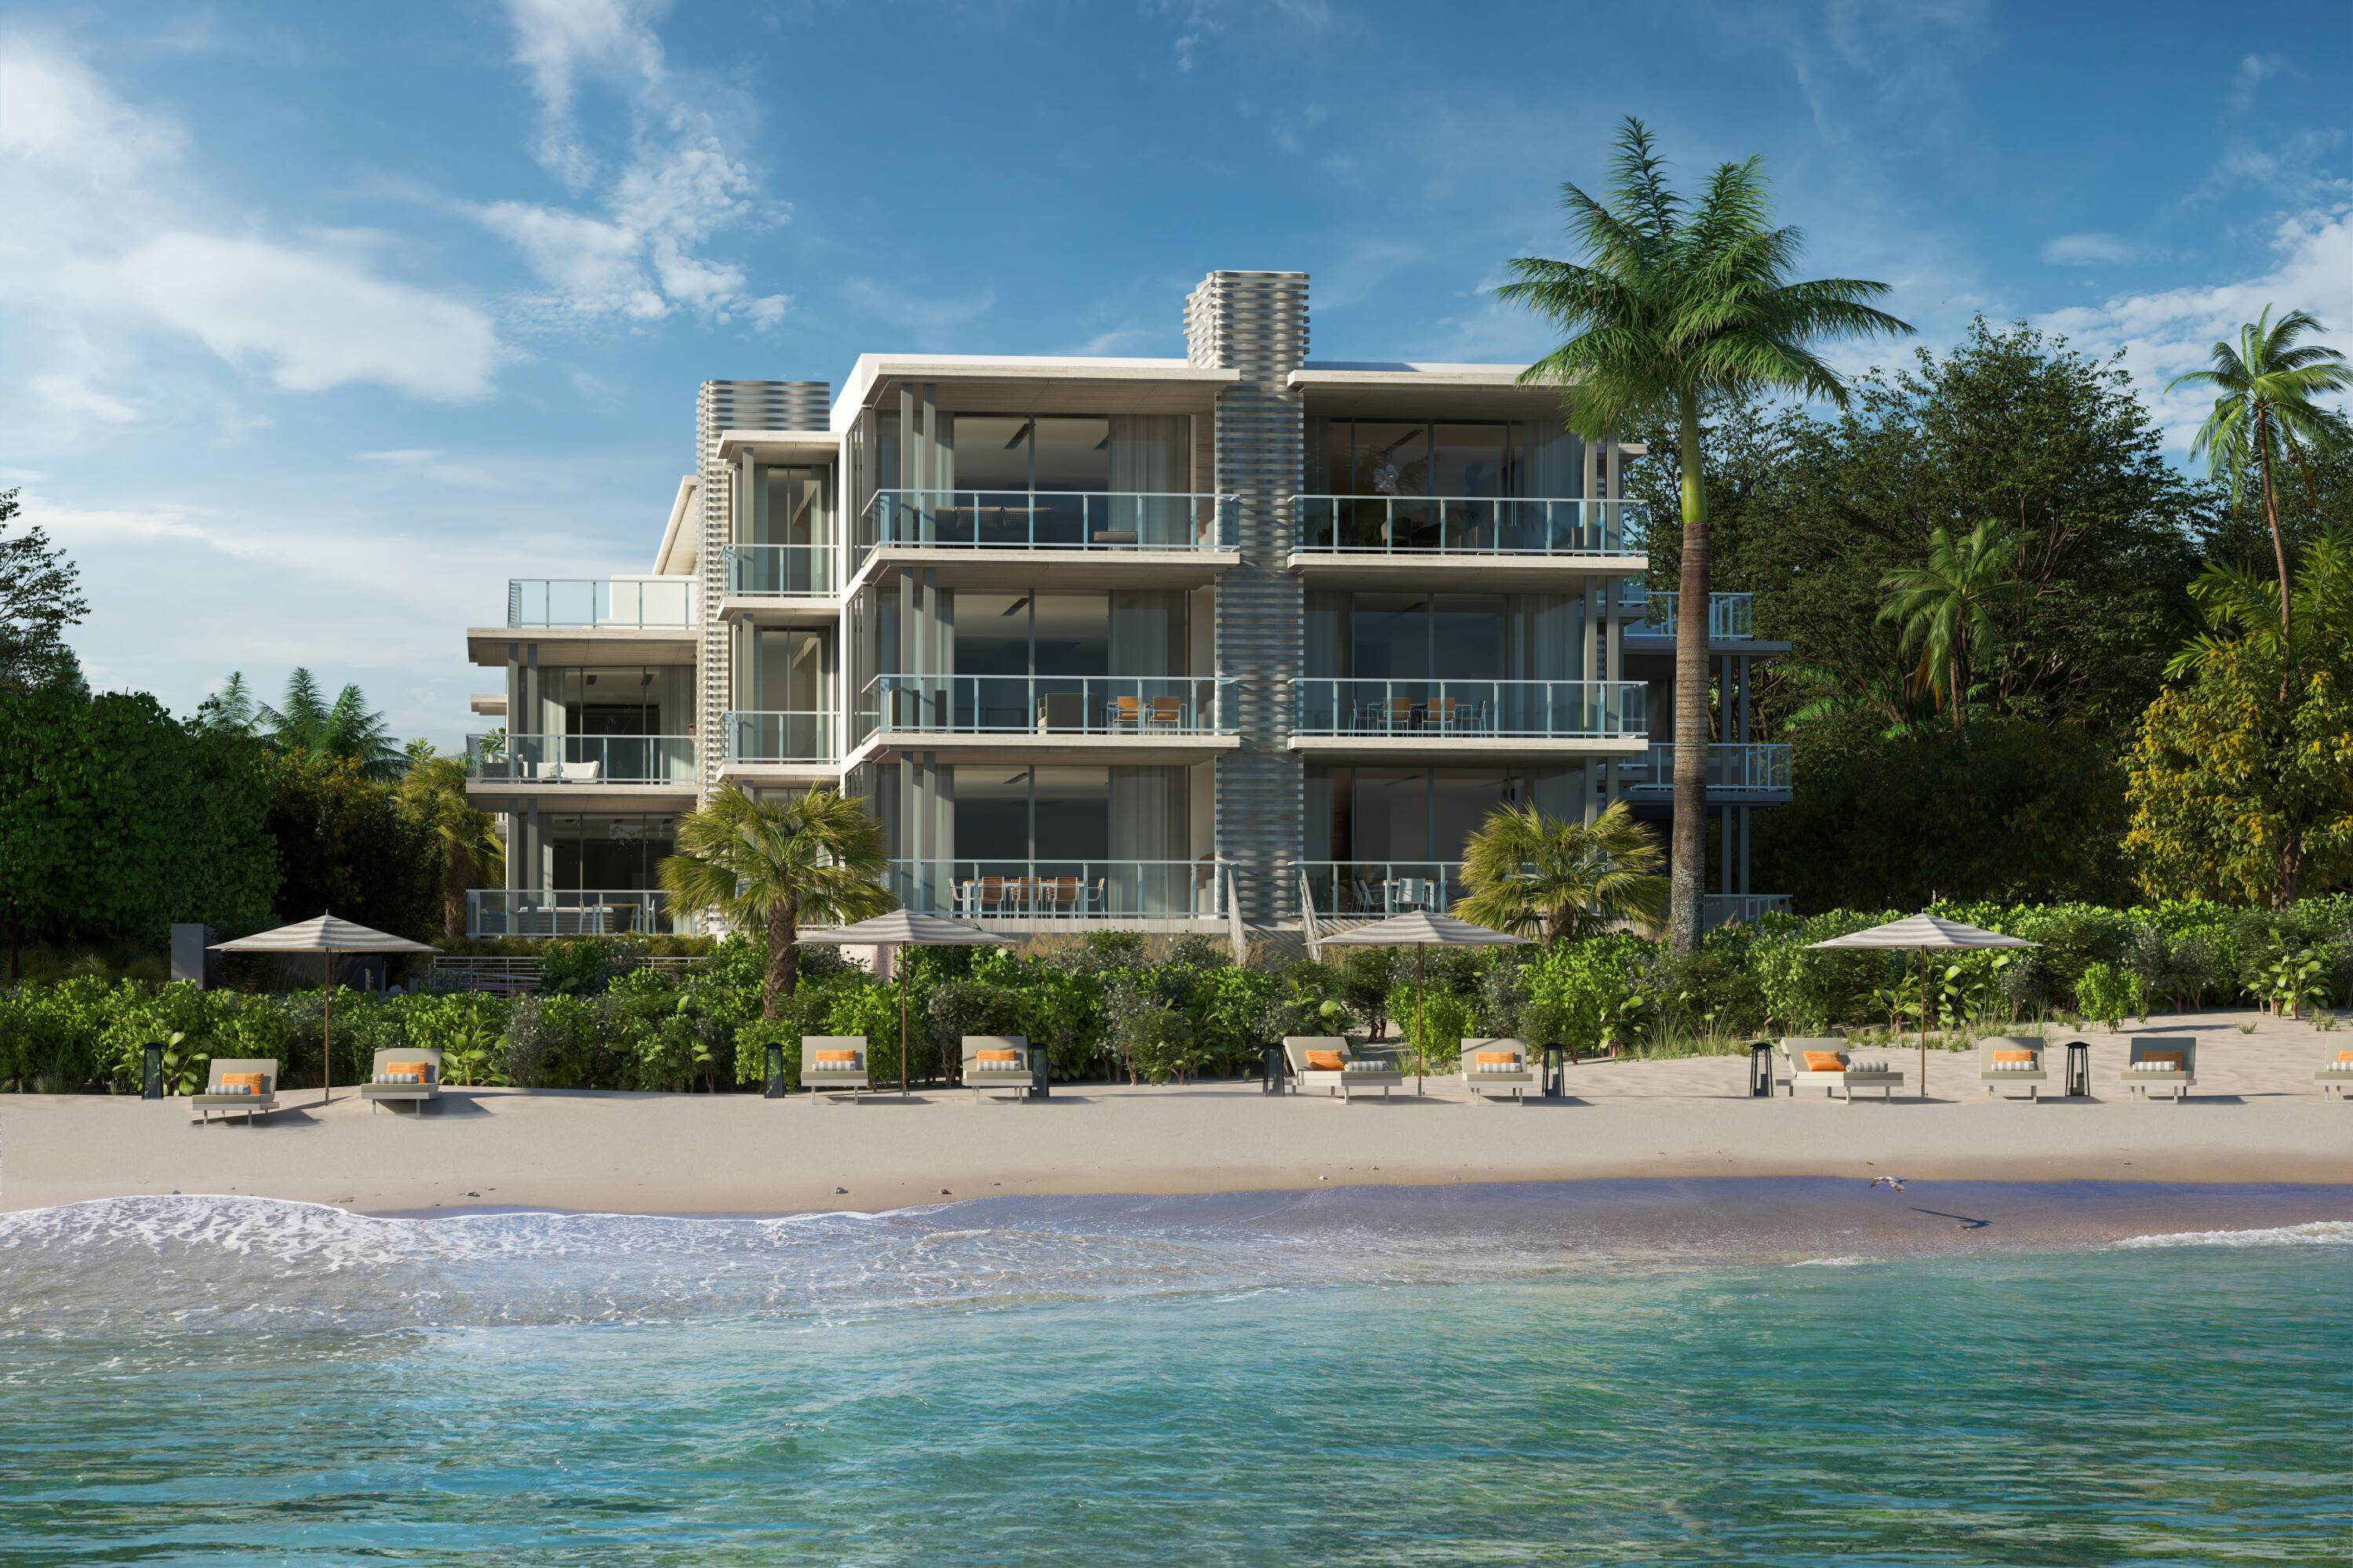 Situated on 120' of pristine oceanfront, 1625 Ocean, Delray Beach's newest boutique building, offers 14 fortunate homeowners a lifestyle of sun, sand and sophistication.